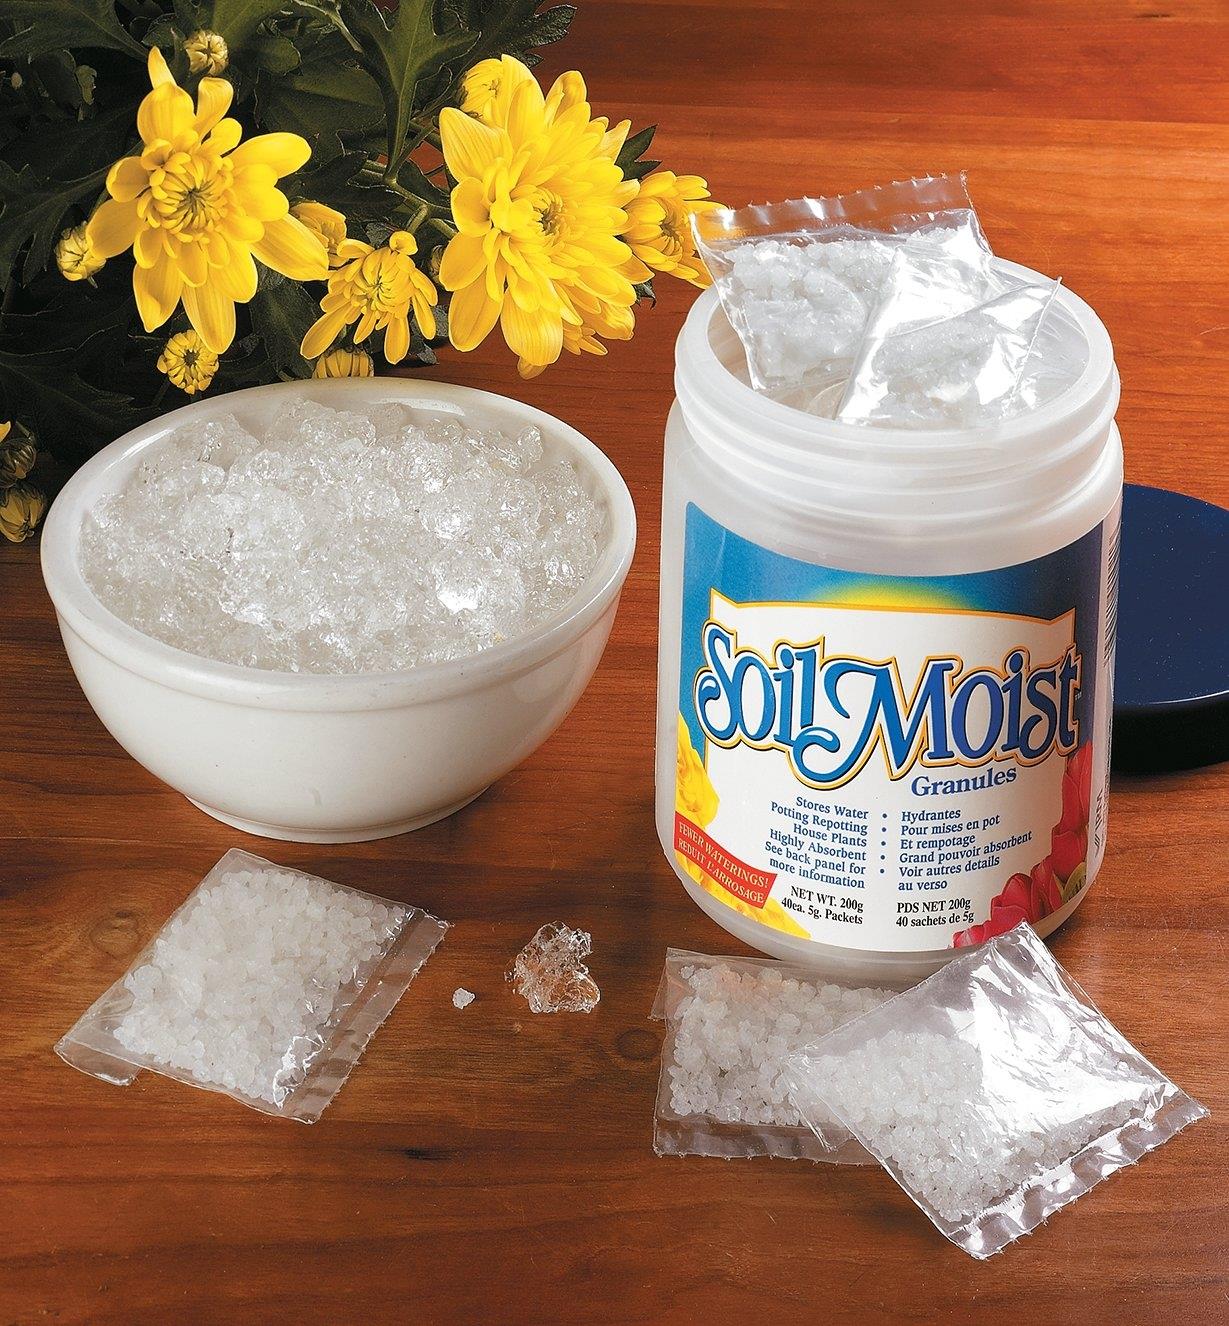 A container of Soil Moist packets beside a bowl of expanded crystals